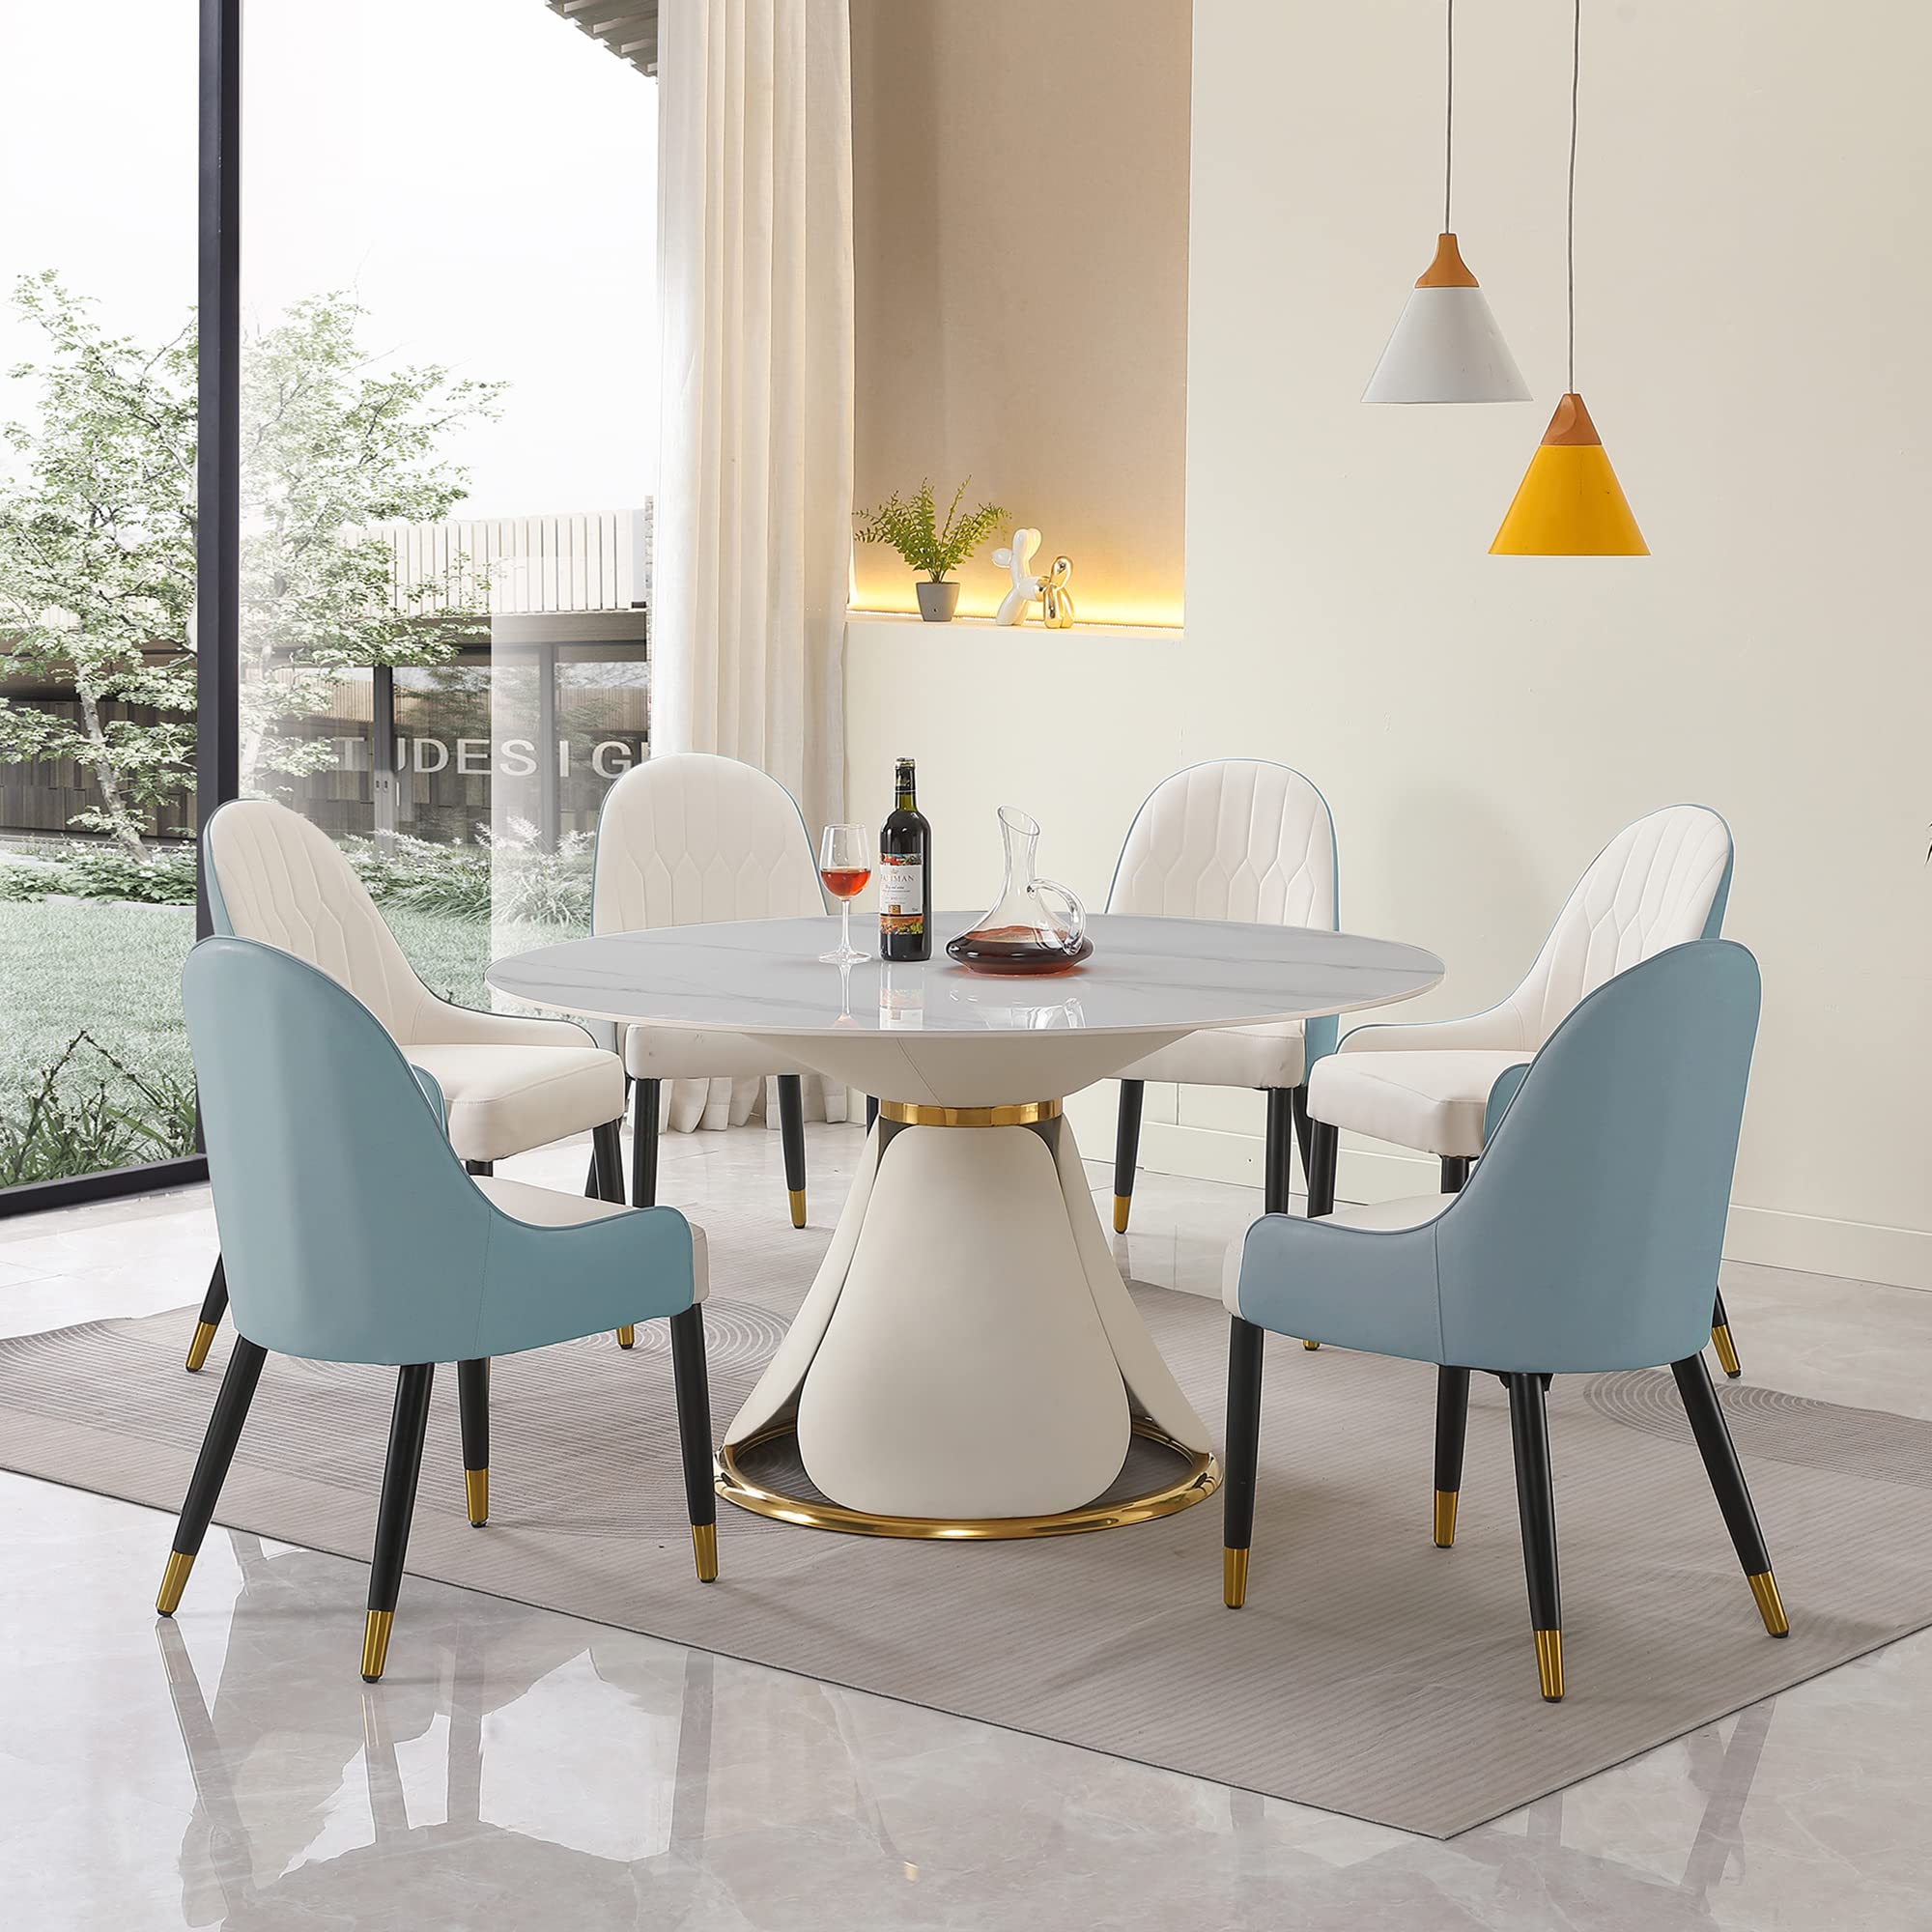 Montary® 53“ Modern Sintered Stone Round Dining Table with Stainless Steel Base with 6 Pcs Blue Chairs